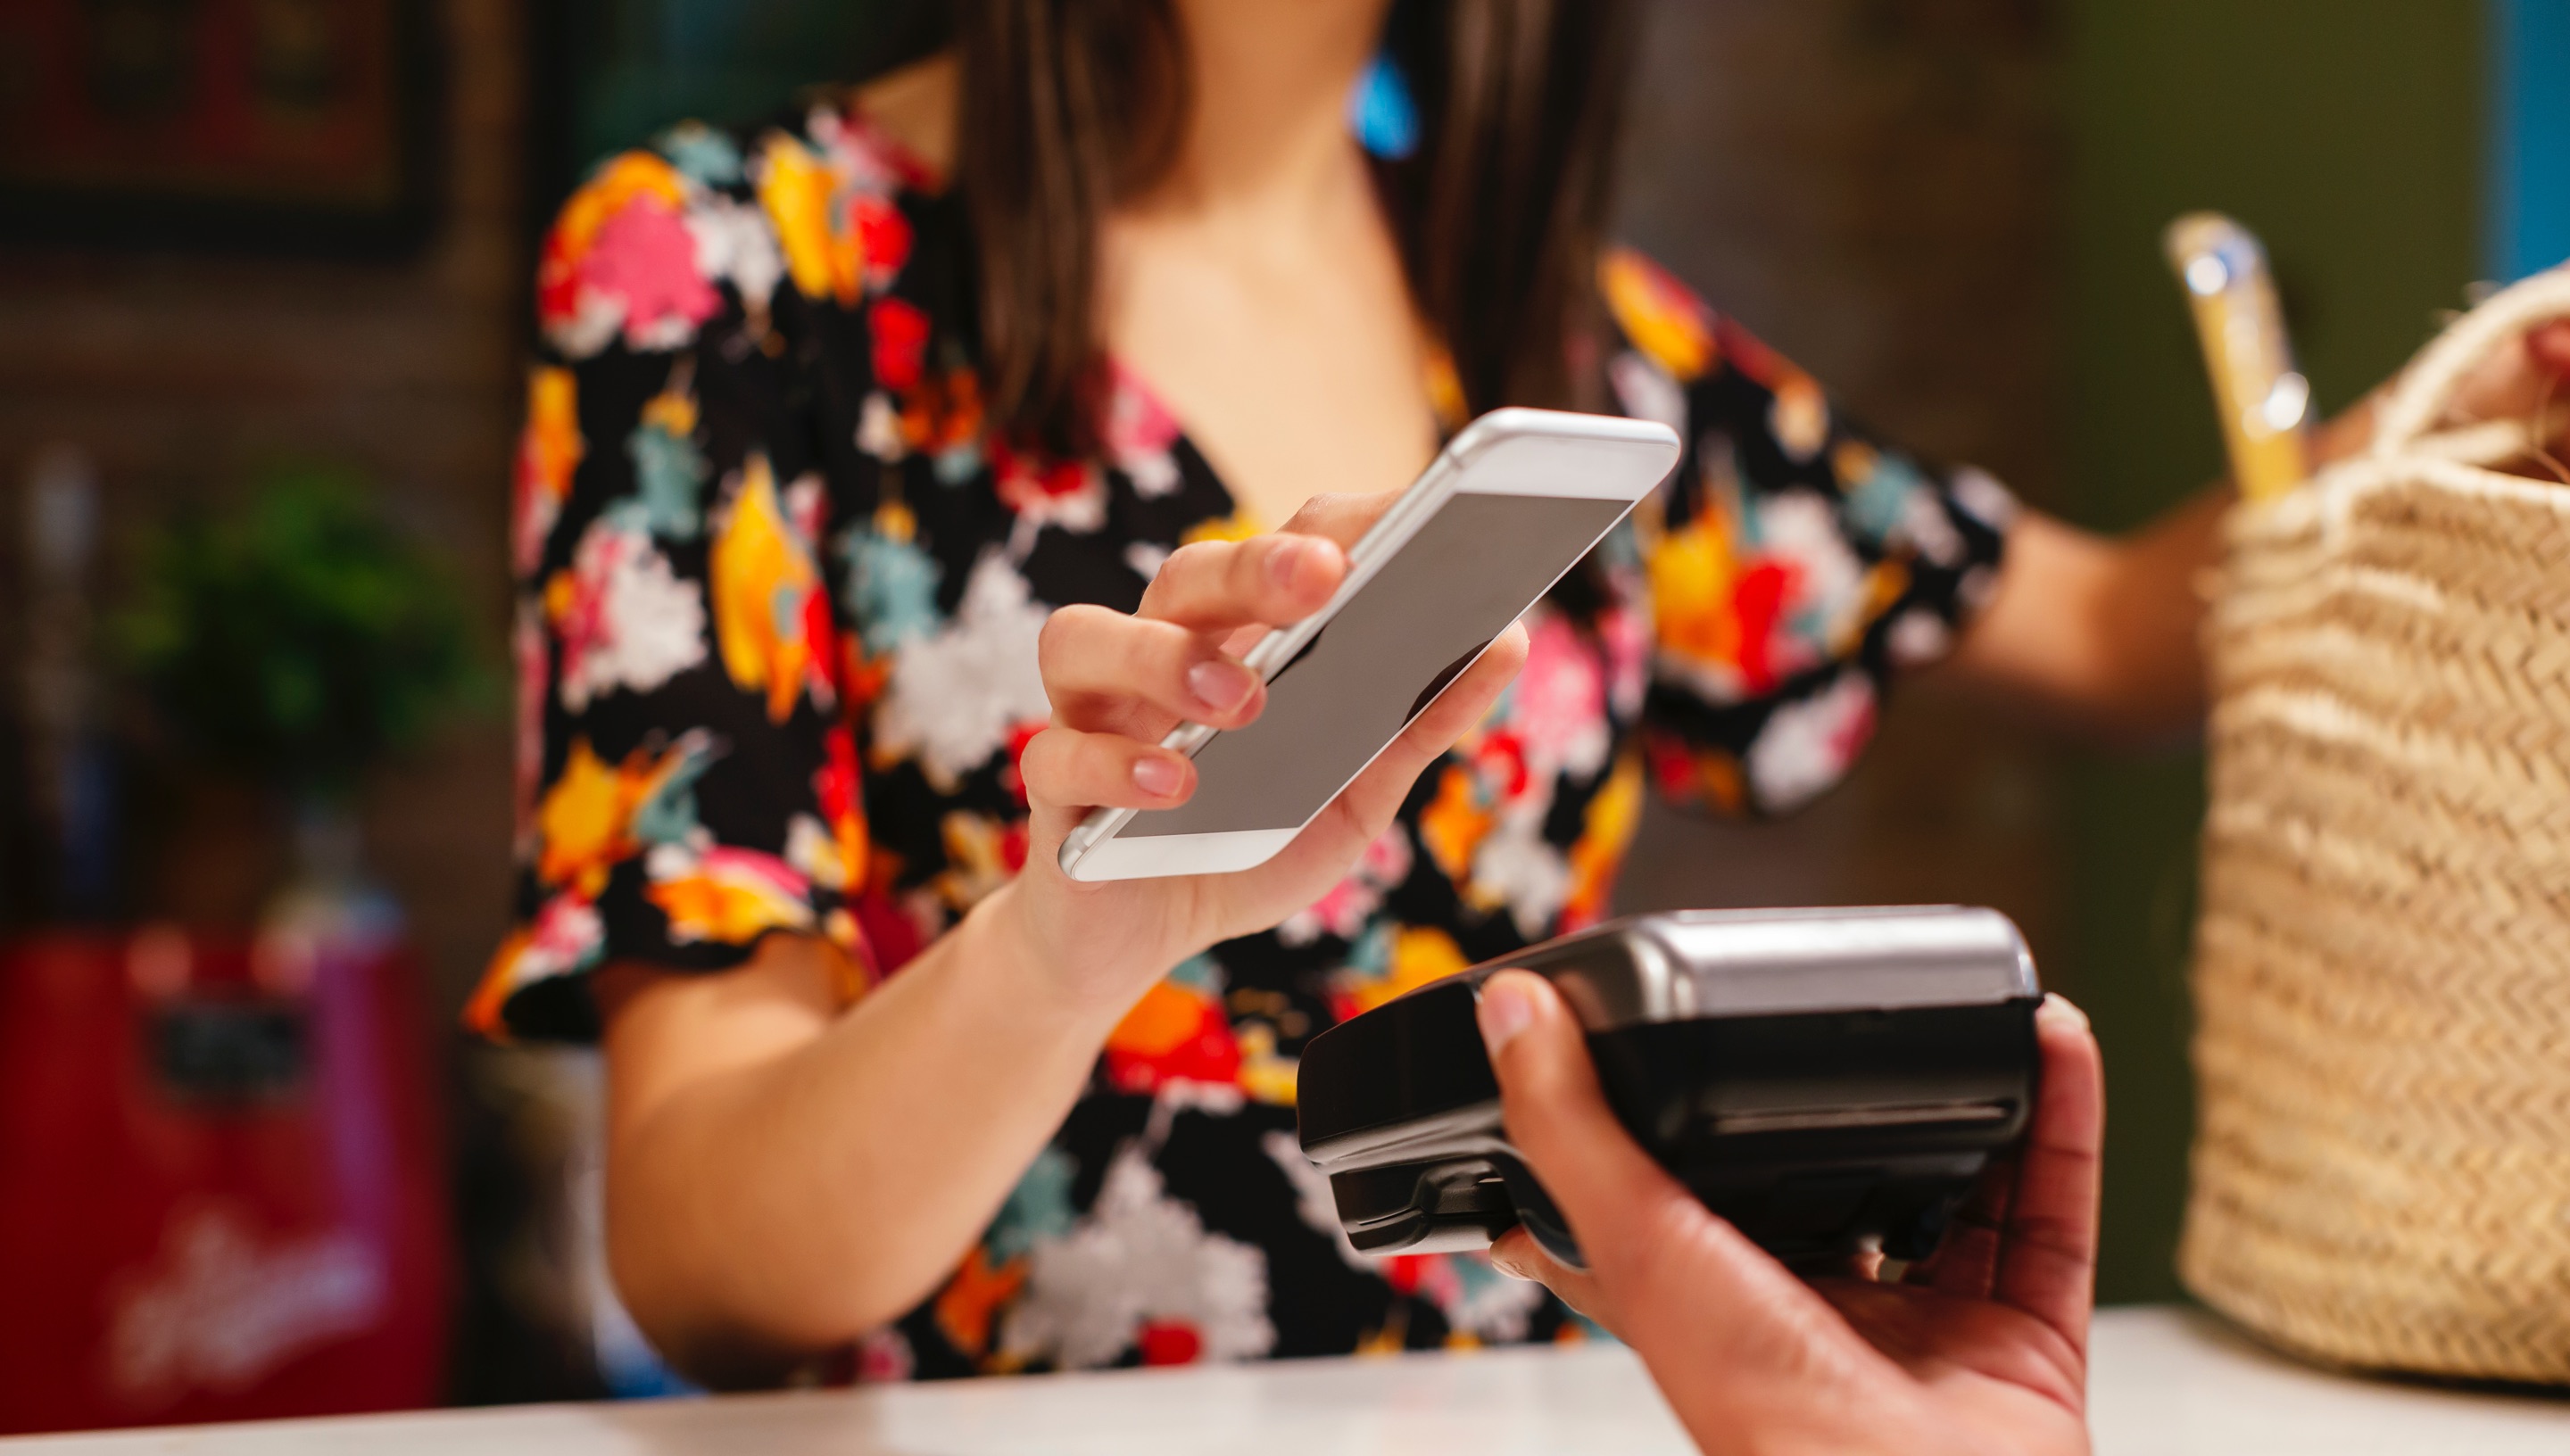 Using mobile payments